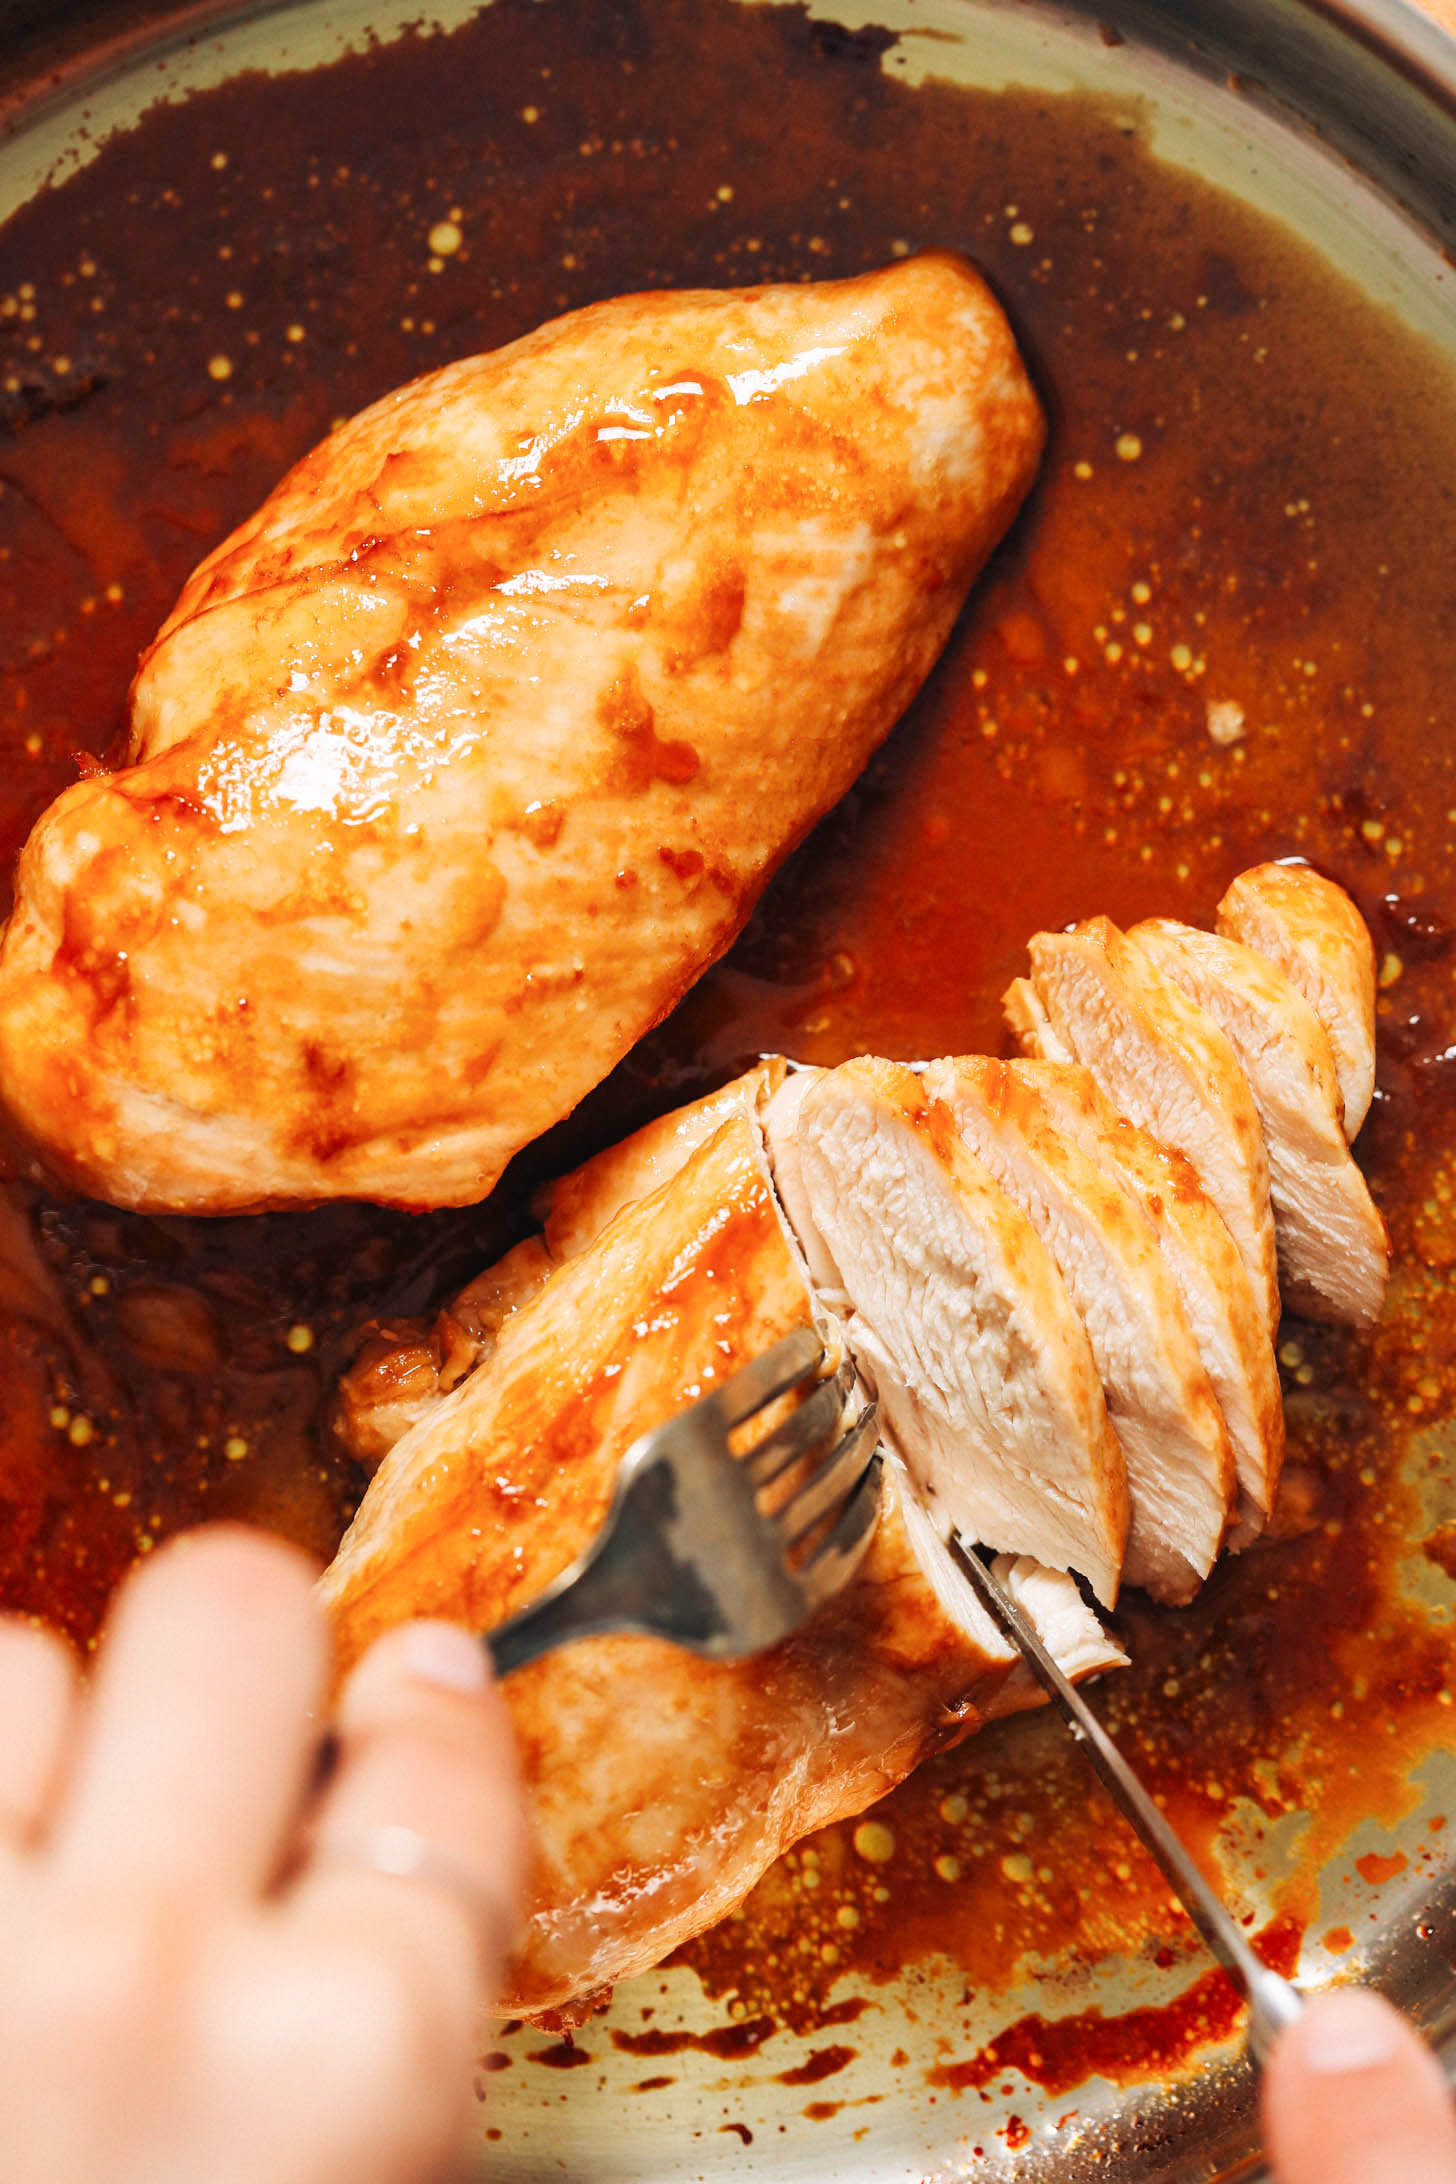 Slicing into a pan seared baked chicken breast